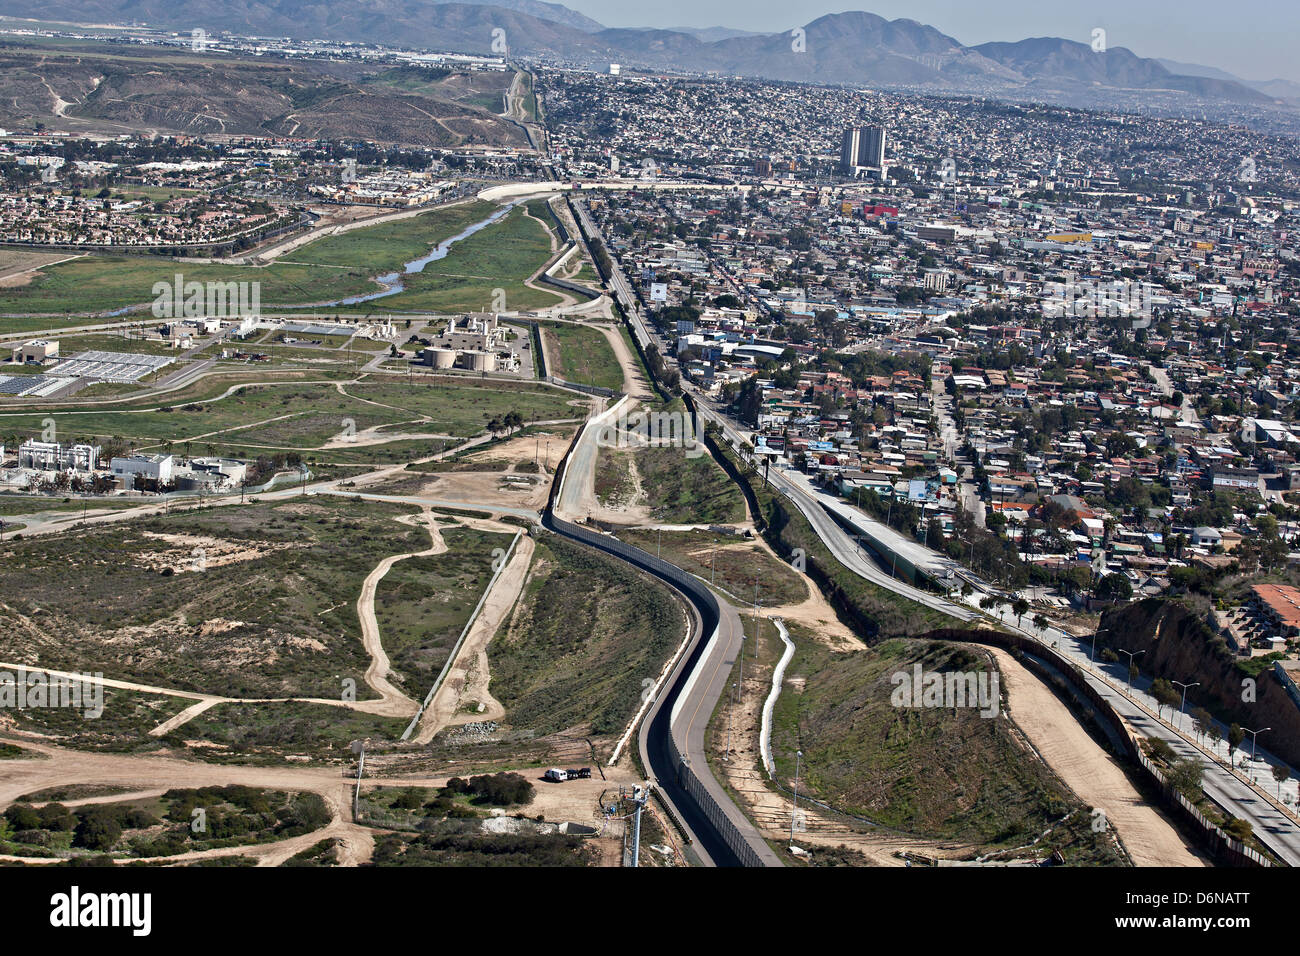 Aerial view of the border fence separating San Diego and Tijuana February 17, 2012 in San Diego, CA Stock Photo